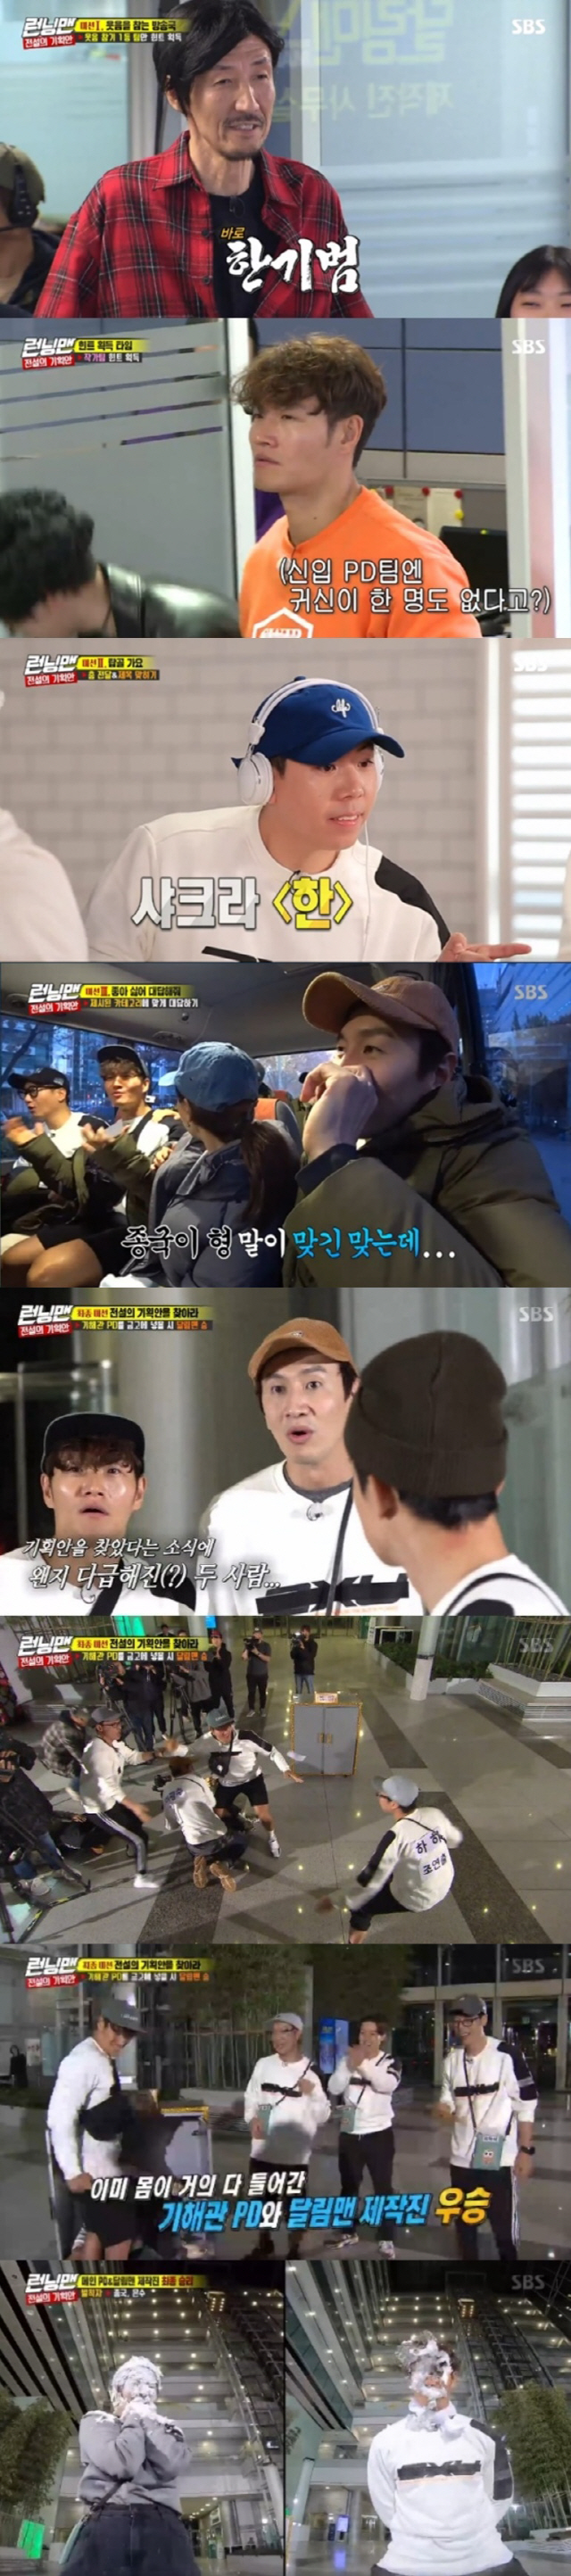 The Identity of SBS Running Man was Seo Eun-soo and Kim Jong-kook.The broadcast was decorated with the Legendary Plan Race, which followed last week, and the members struggle to find Kolocki and the angle was drawn.With Godseven camp, actor Seo Eun-soo, Choi Lee and comedian Hur Kyung-hwan on the show as guests, the members were divided into PD, writer and new PD teams of the Running Man program to challenge their first mission, a broadcasting station looking for laughter.The members burst into laughter bombings from the melon navel tool uncle to Yondu general manager, and Han Ki-bum, who appeared in Laughing Inclusion Race last time, appeared as a wedge-biting three-member girl group Hans Band and held a big laughing bomb.The writer team was able to get the hint by laughing the least, and the writer team found that the new PD team had no collocide with Kollok.The second mission Topgol Song was a mission to hit the hit choreography of the hit song, but the members failed to get hints due to successive failures.The third round was played out against the background of the station, and Koloki and the other members were immersed in identifying hints everywhere, but Koloki and the other members had to be eliminated.Starting with Chois elimination, which had been suspected by everyone, Jeon So-min, Song Ji-hyo, and Yang Se-chan were in-N-Out Burger, and Yoo Jae-Suk put Collock Seo Eun-soo in-N-Out Burger based on the hint that the assistant director is a woman.Now, with only the Identity of the Pick left, Kim Jong-kook and Lee Kwang-soo clashed.Lee Kwang-soo found out that the main PD had to go inside the safe and succeeded in the final mission.Kim Jong-kook and Seo Eun-soo were penalized for fresh cream as they ended with the victory of the Runman crew.